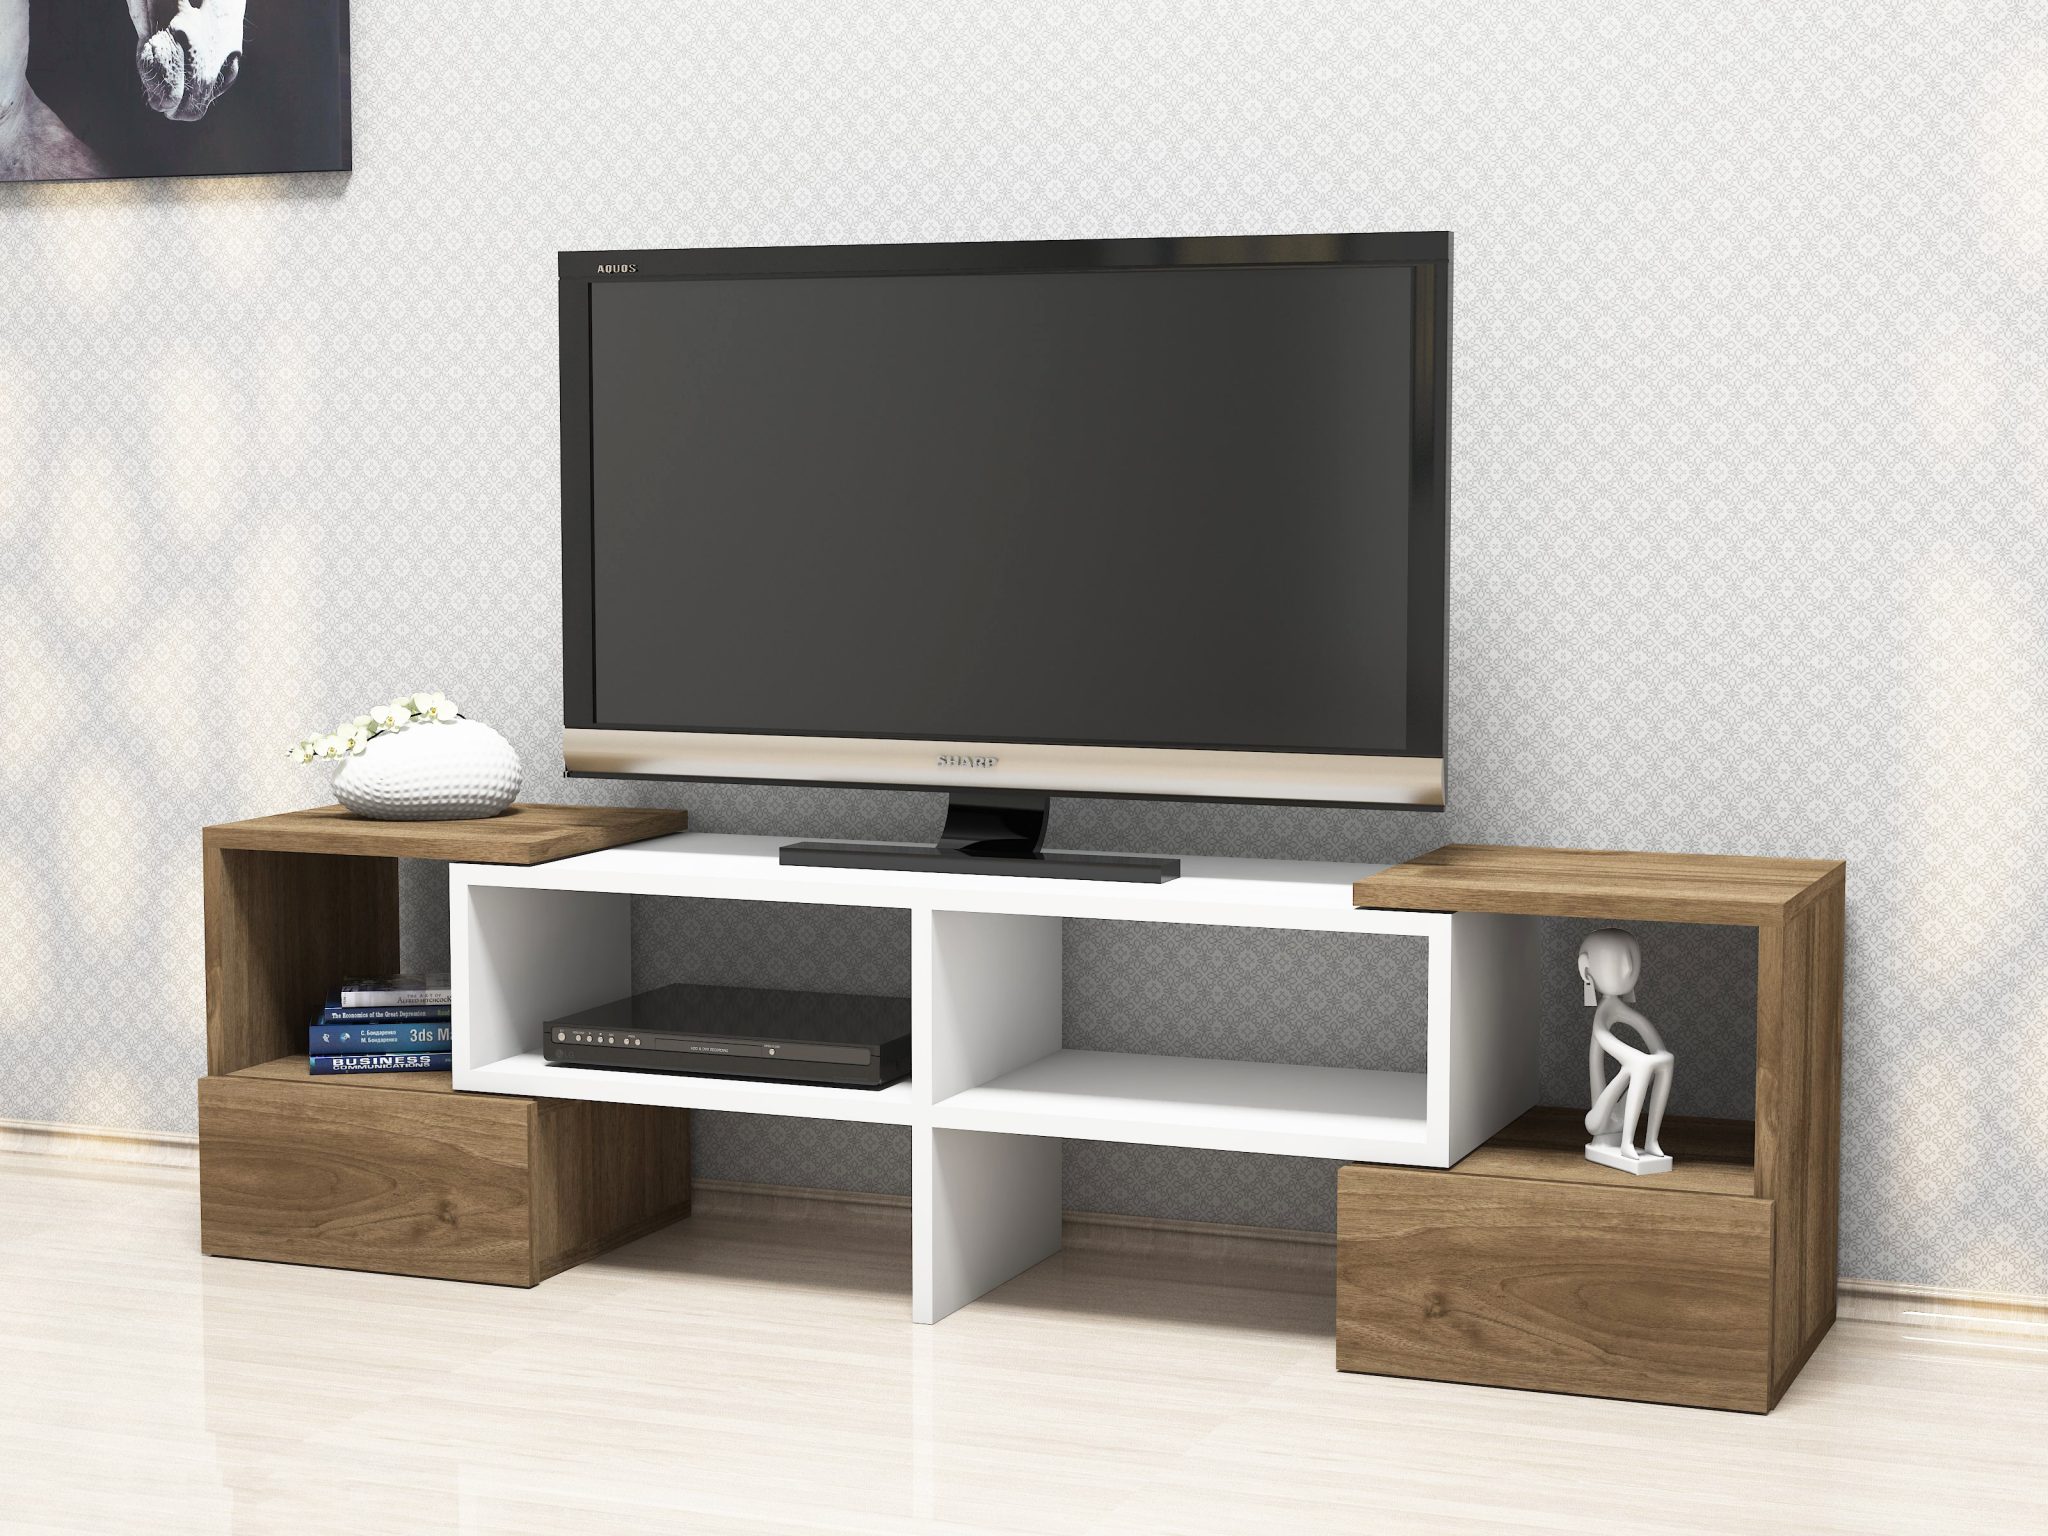 Beautiful Corner TV Stand Ideas - Engineering Discoveries